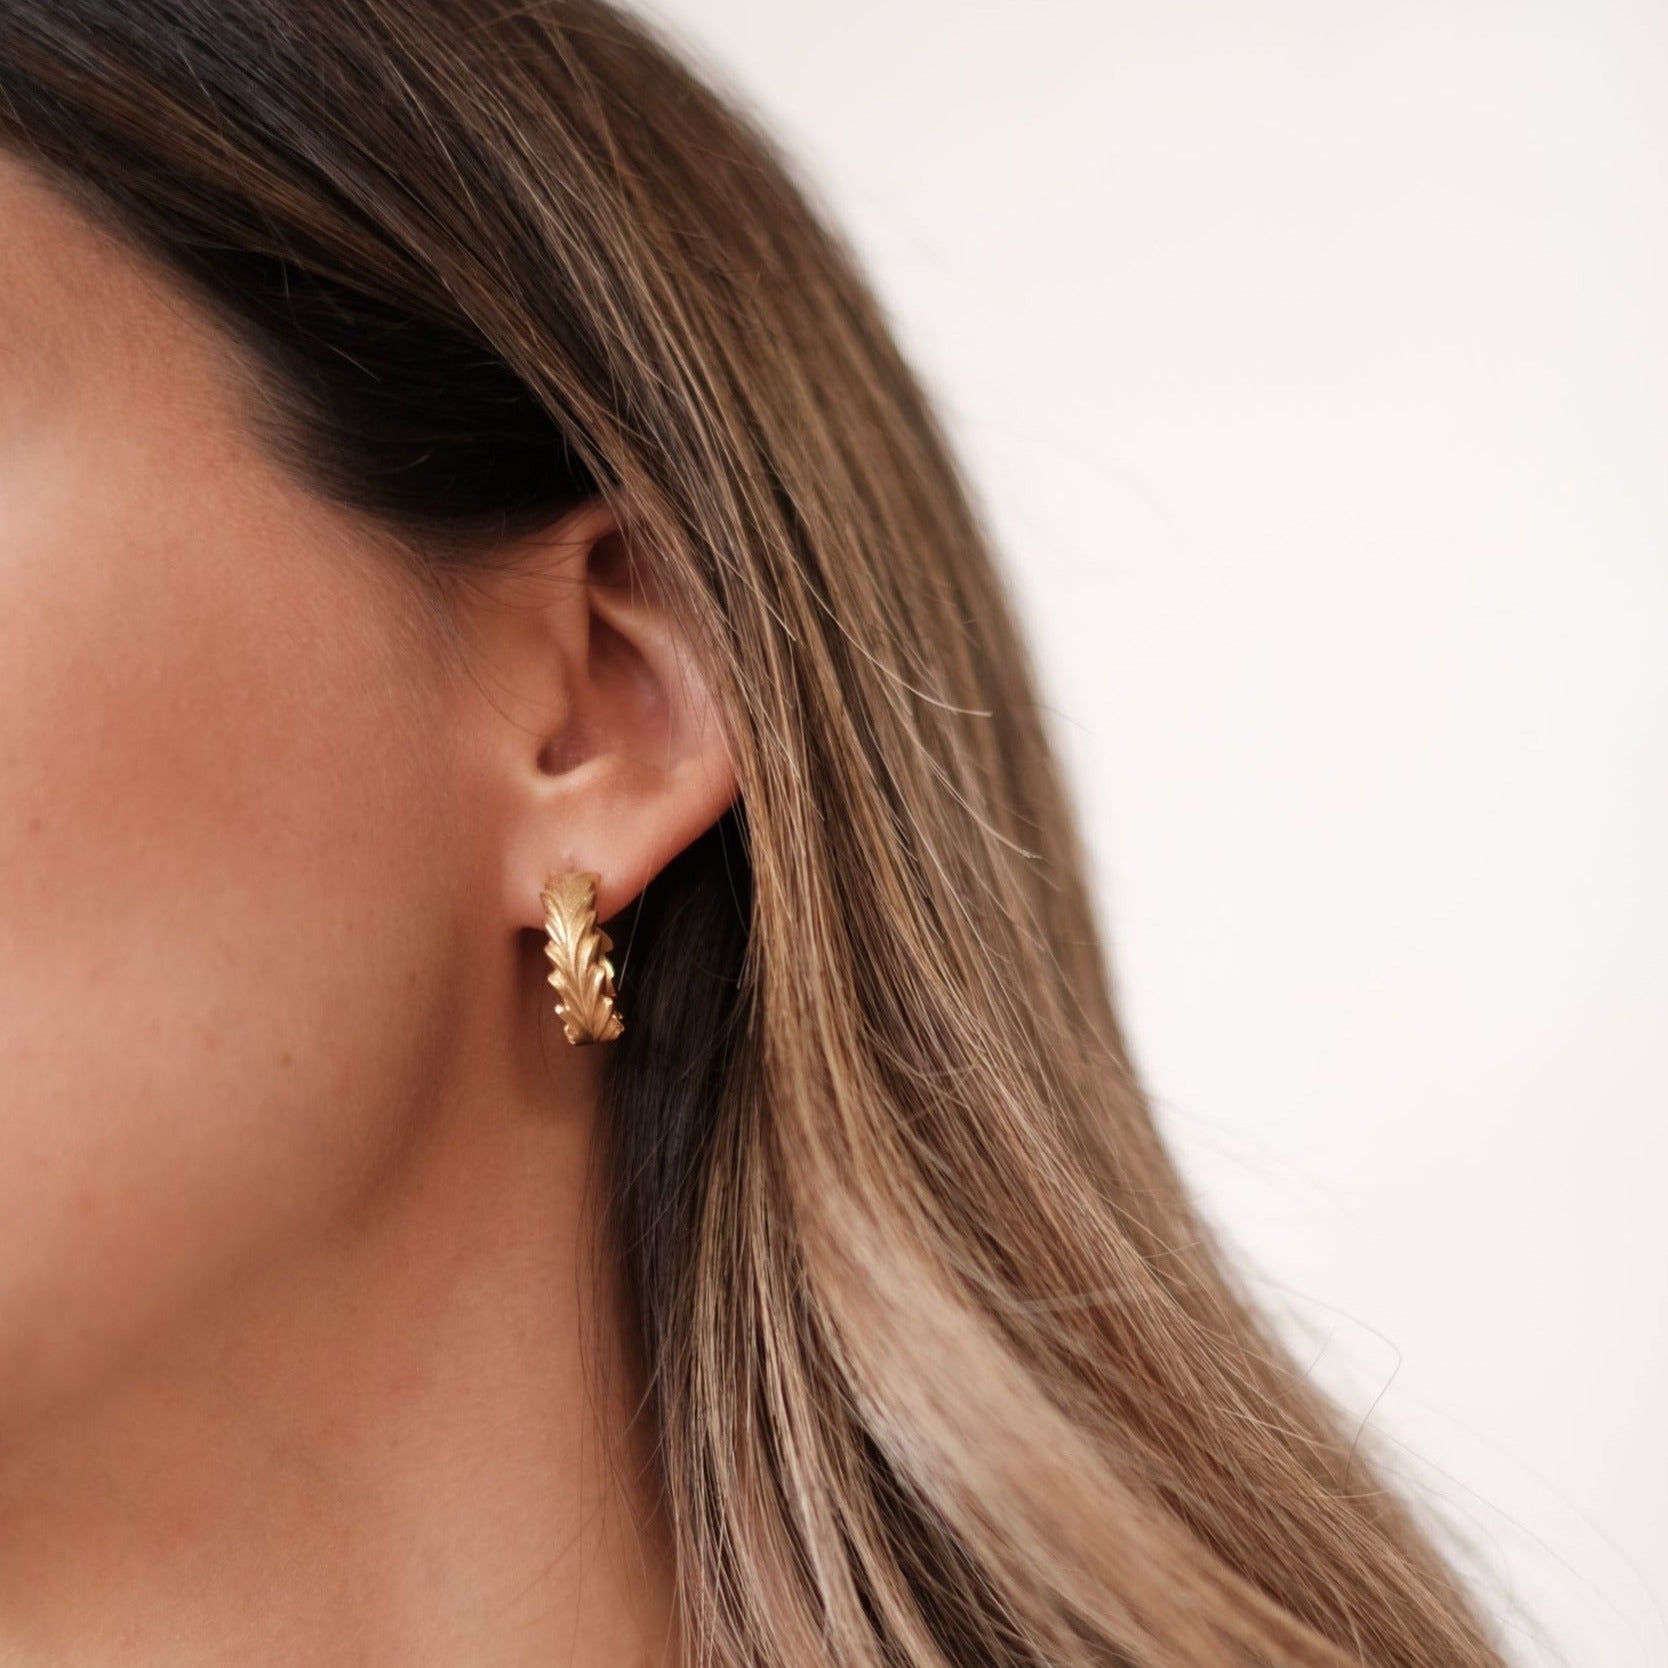 A woman's ear adorned with timeless elegance, flaunting Cremilde Bispo Jewellery's Essential Leaf Hoops GP for an exclusive touch.